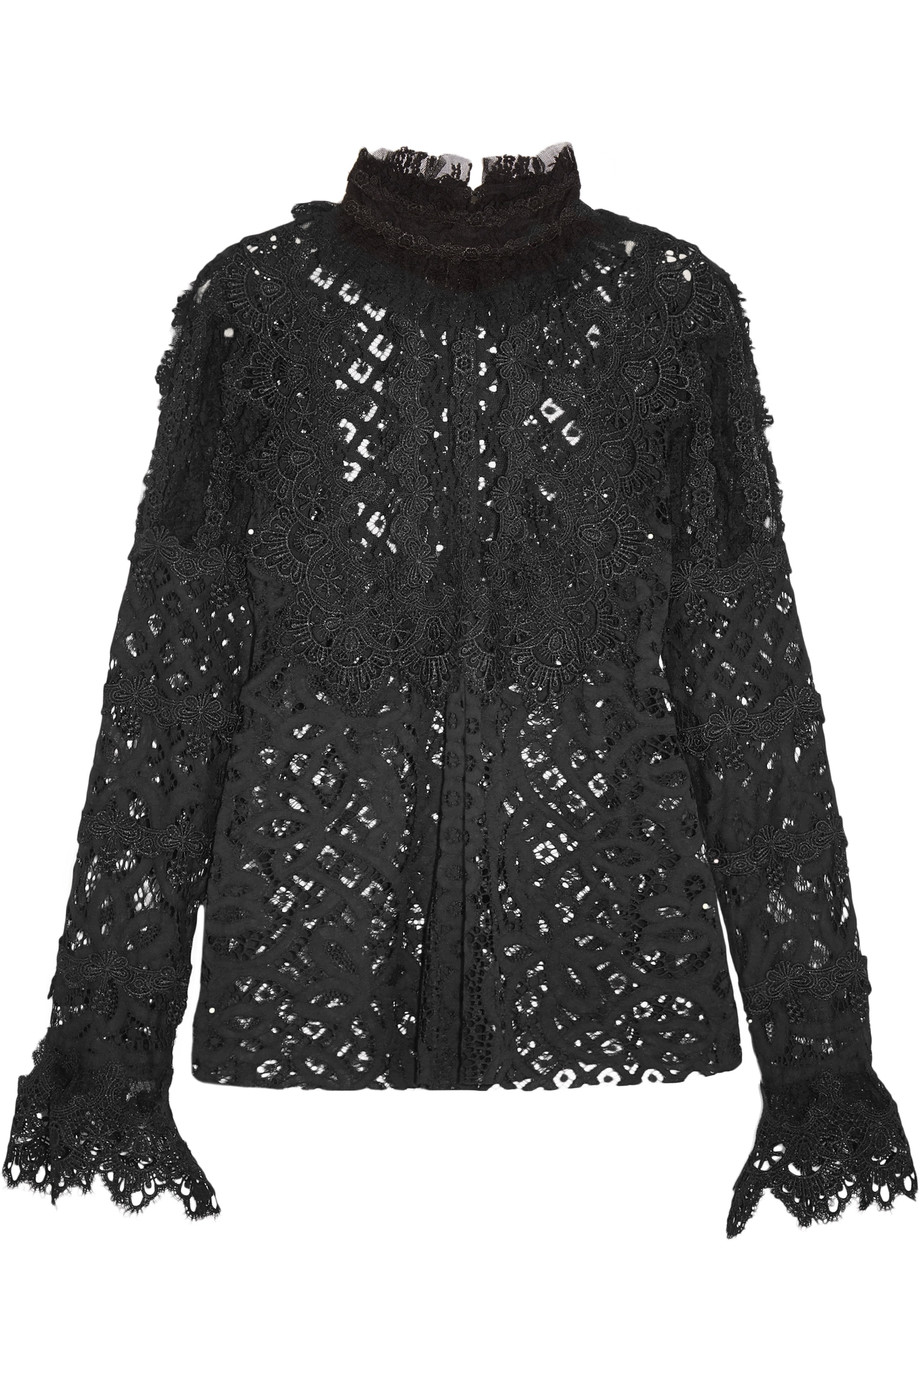 Anna Sui Magical Mystery Ruffled Crocheted Lace And Mesh Blouse | ModeSens